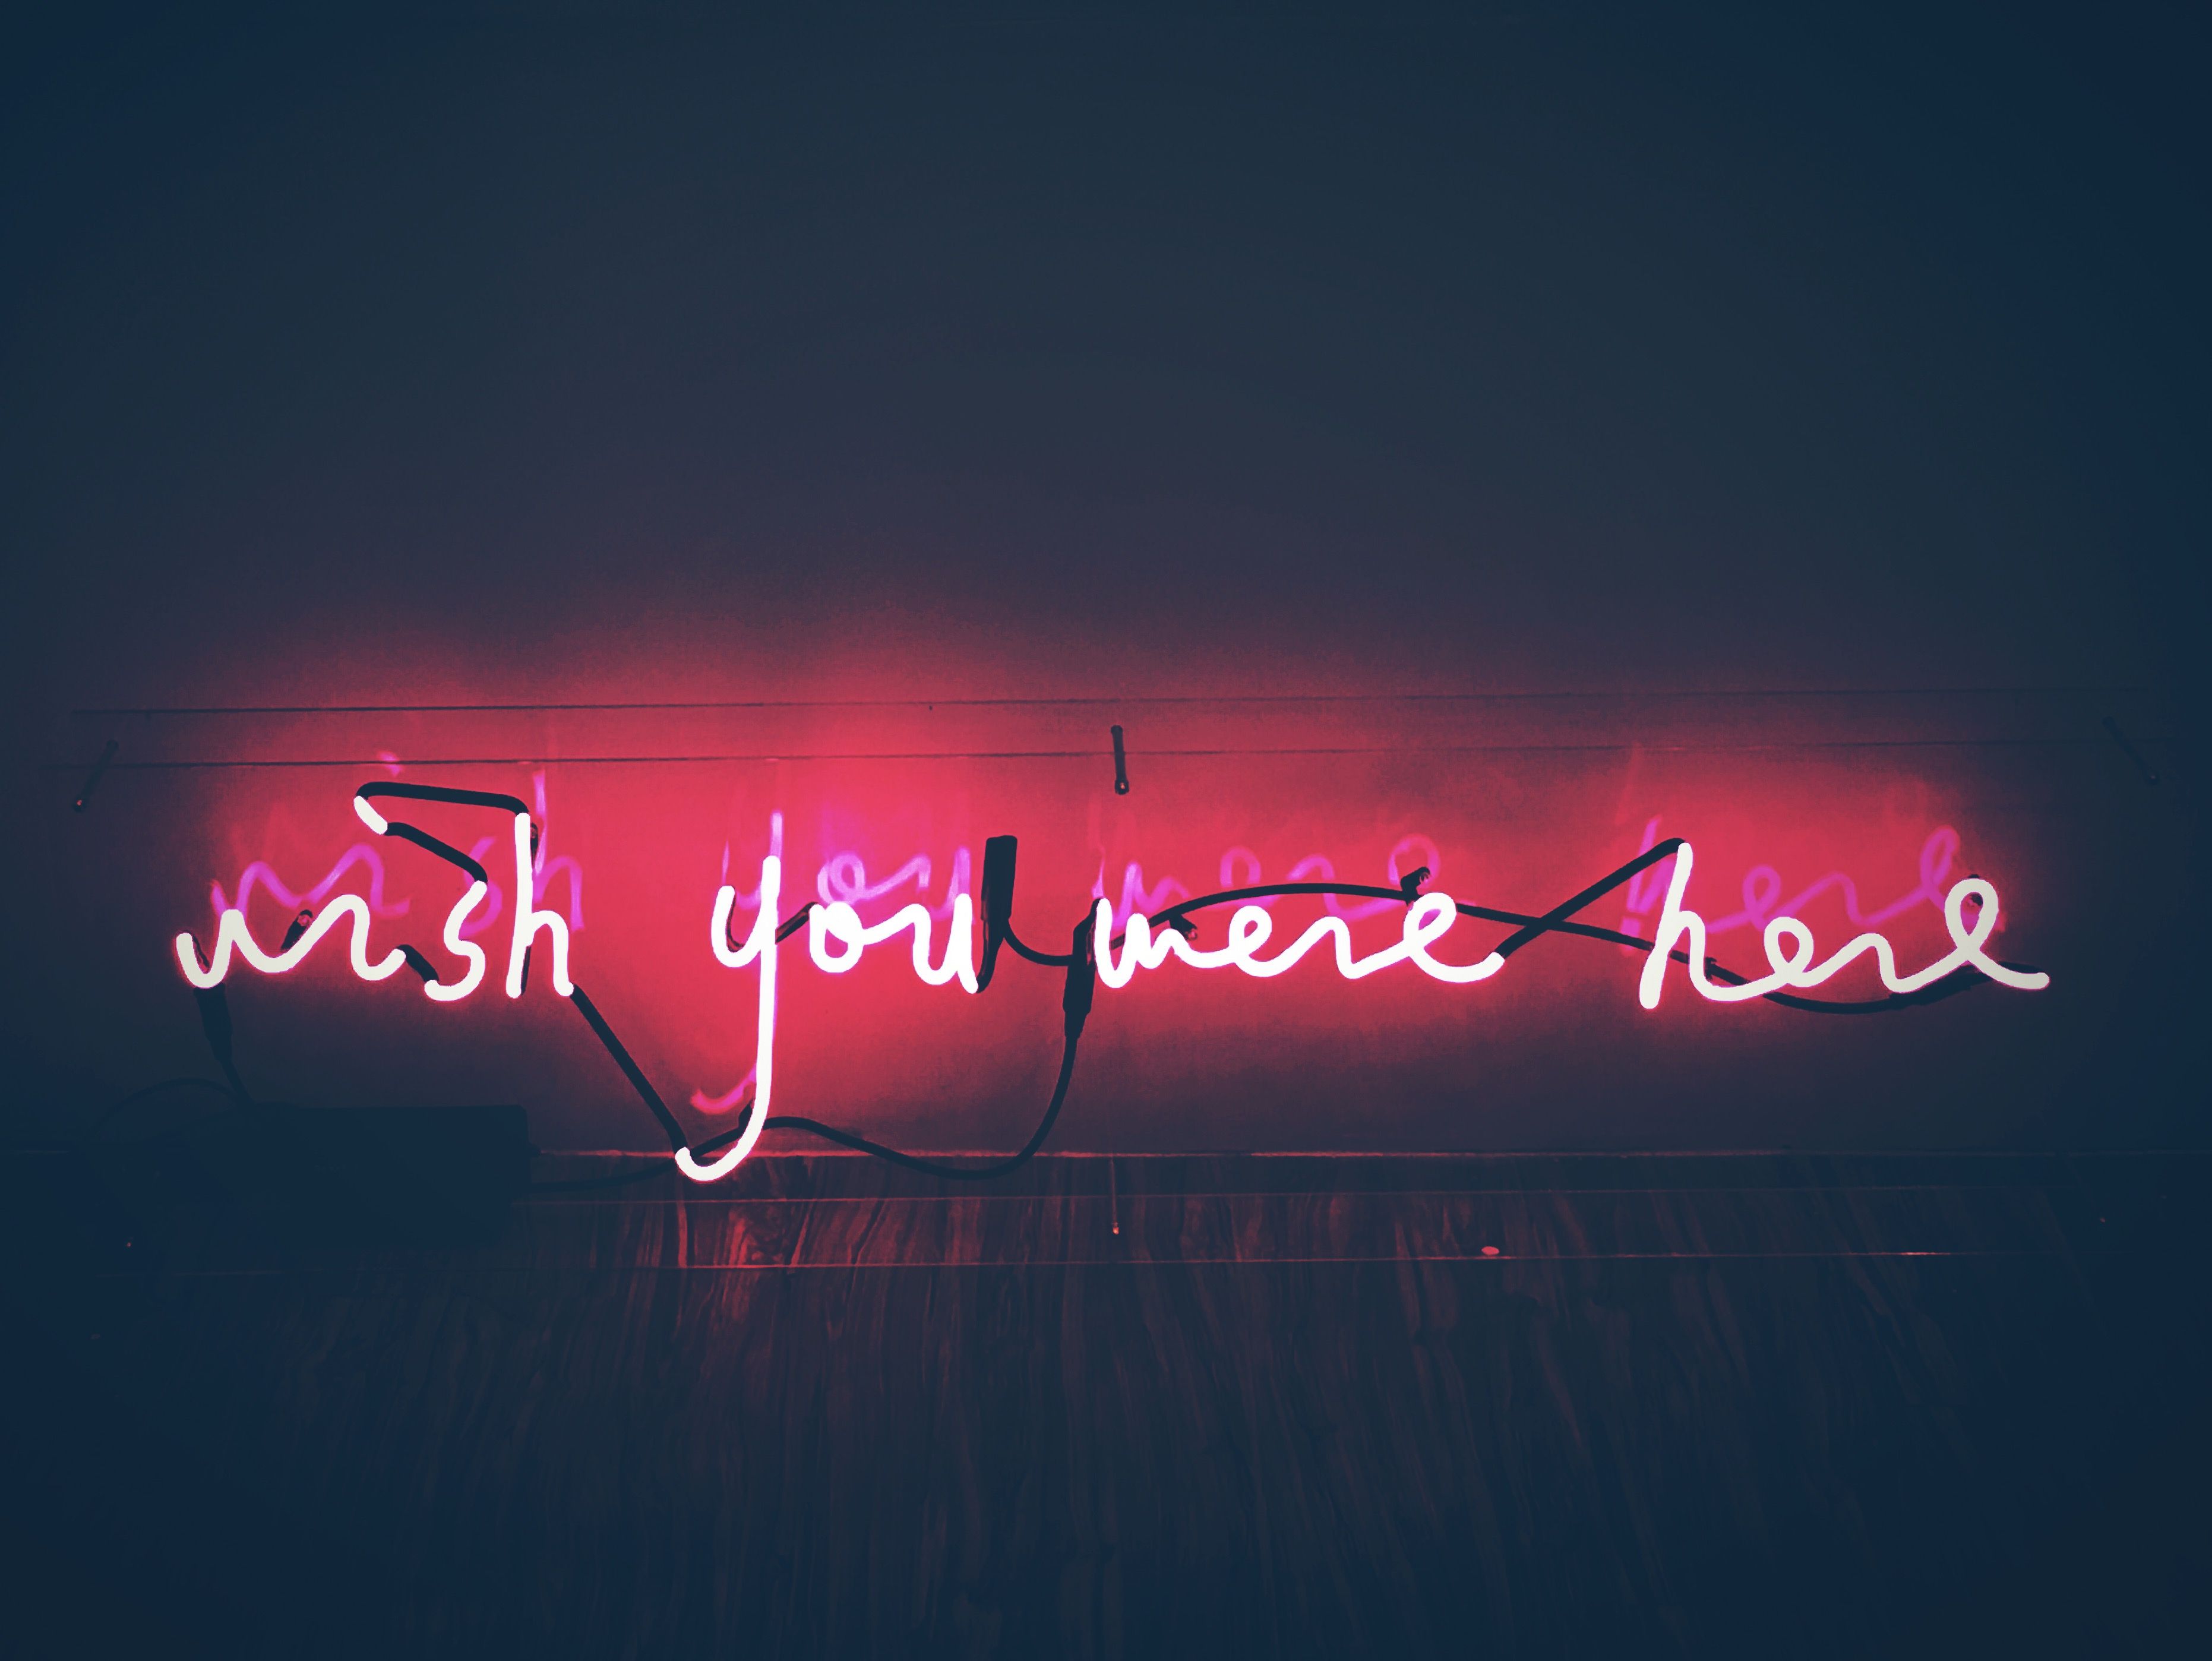 Wish You Were Here Neon Sign - HD Wallpaper 